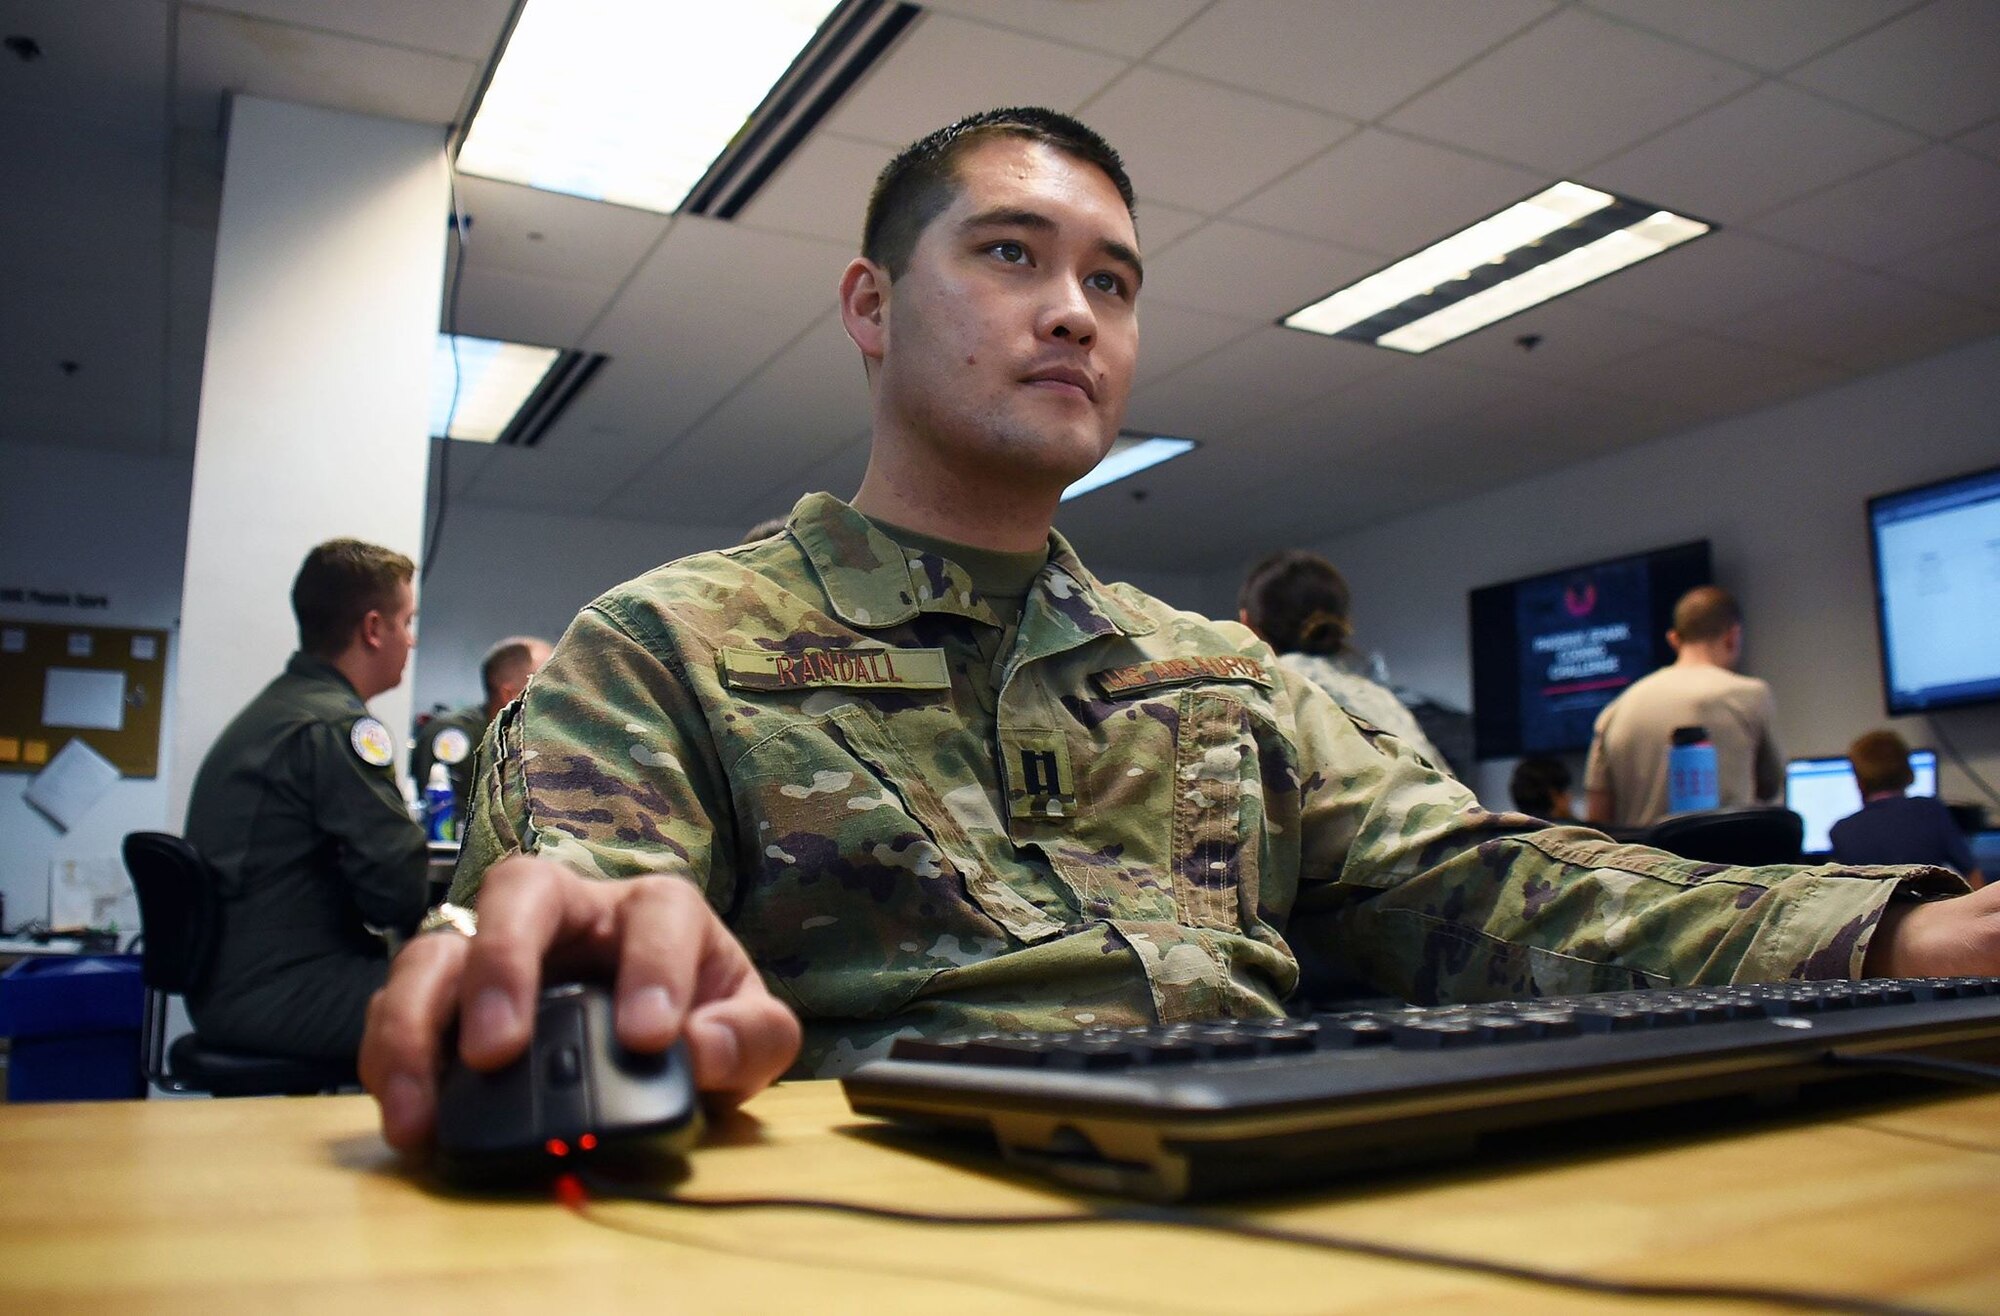 Capt. Derek Randall, 60th Operations Support Squadron officer in charge of intelligence analysis, participates in a coding challenge hosted by Travis Air Force Base, Calif.'s Phoenix Spark innovation team Oct. 26. Randall's expertise shone through during the challenge leading him to call the challenges, "fairly simple." (U.S. Air Force photo by Airman 1st Class Jonathon D.A. Carnell)